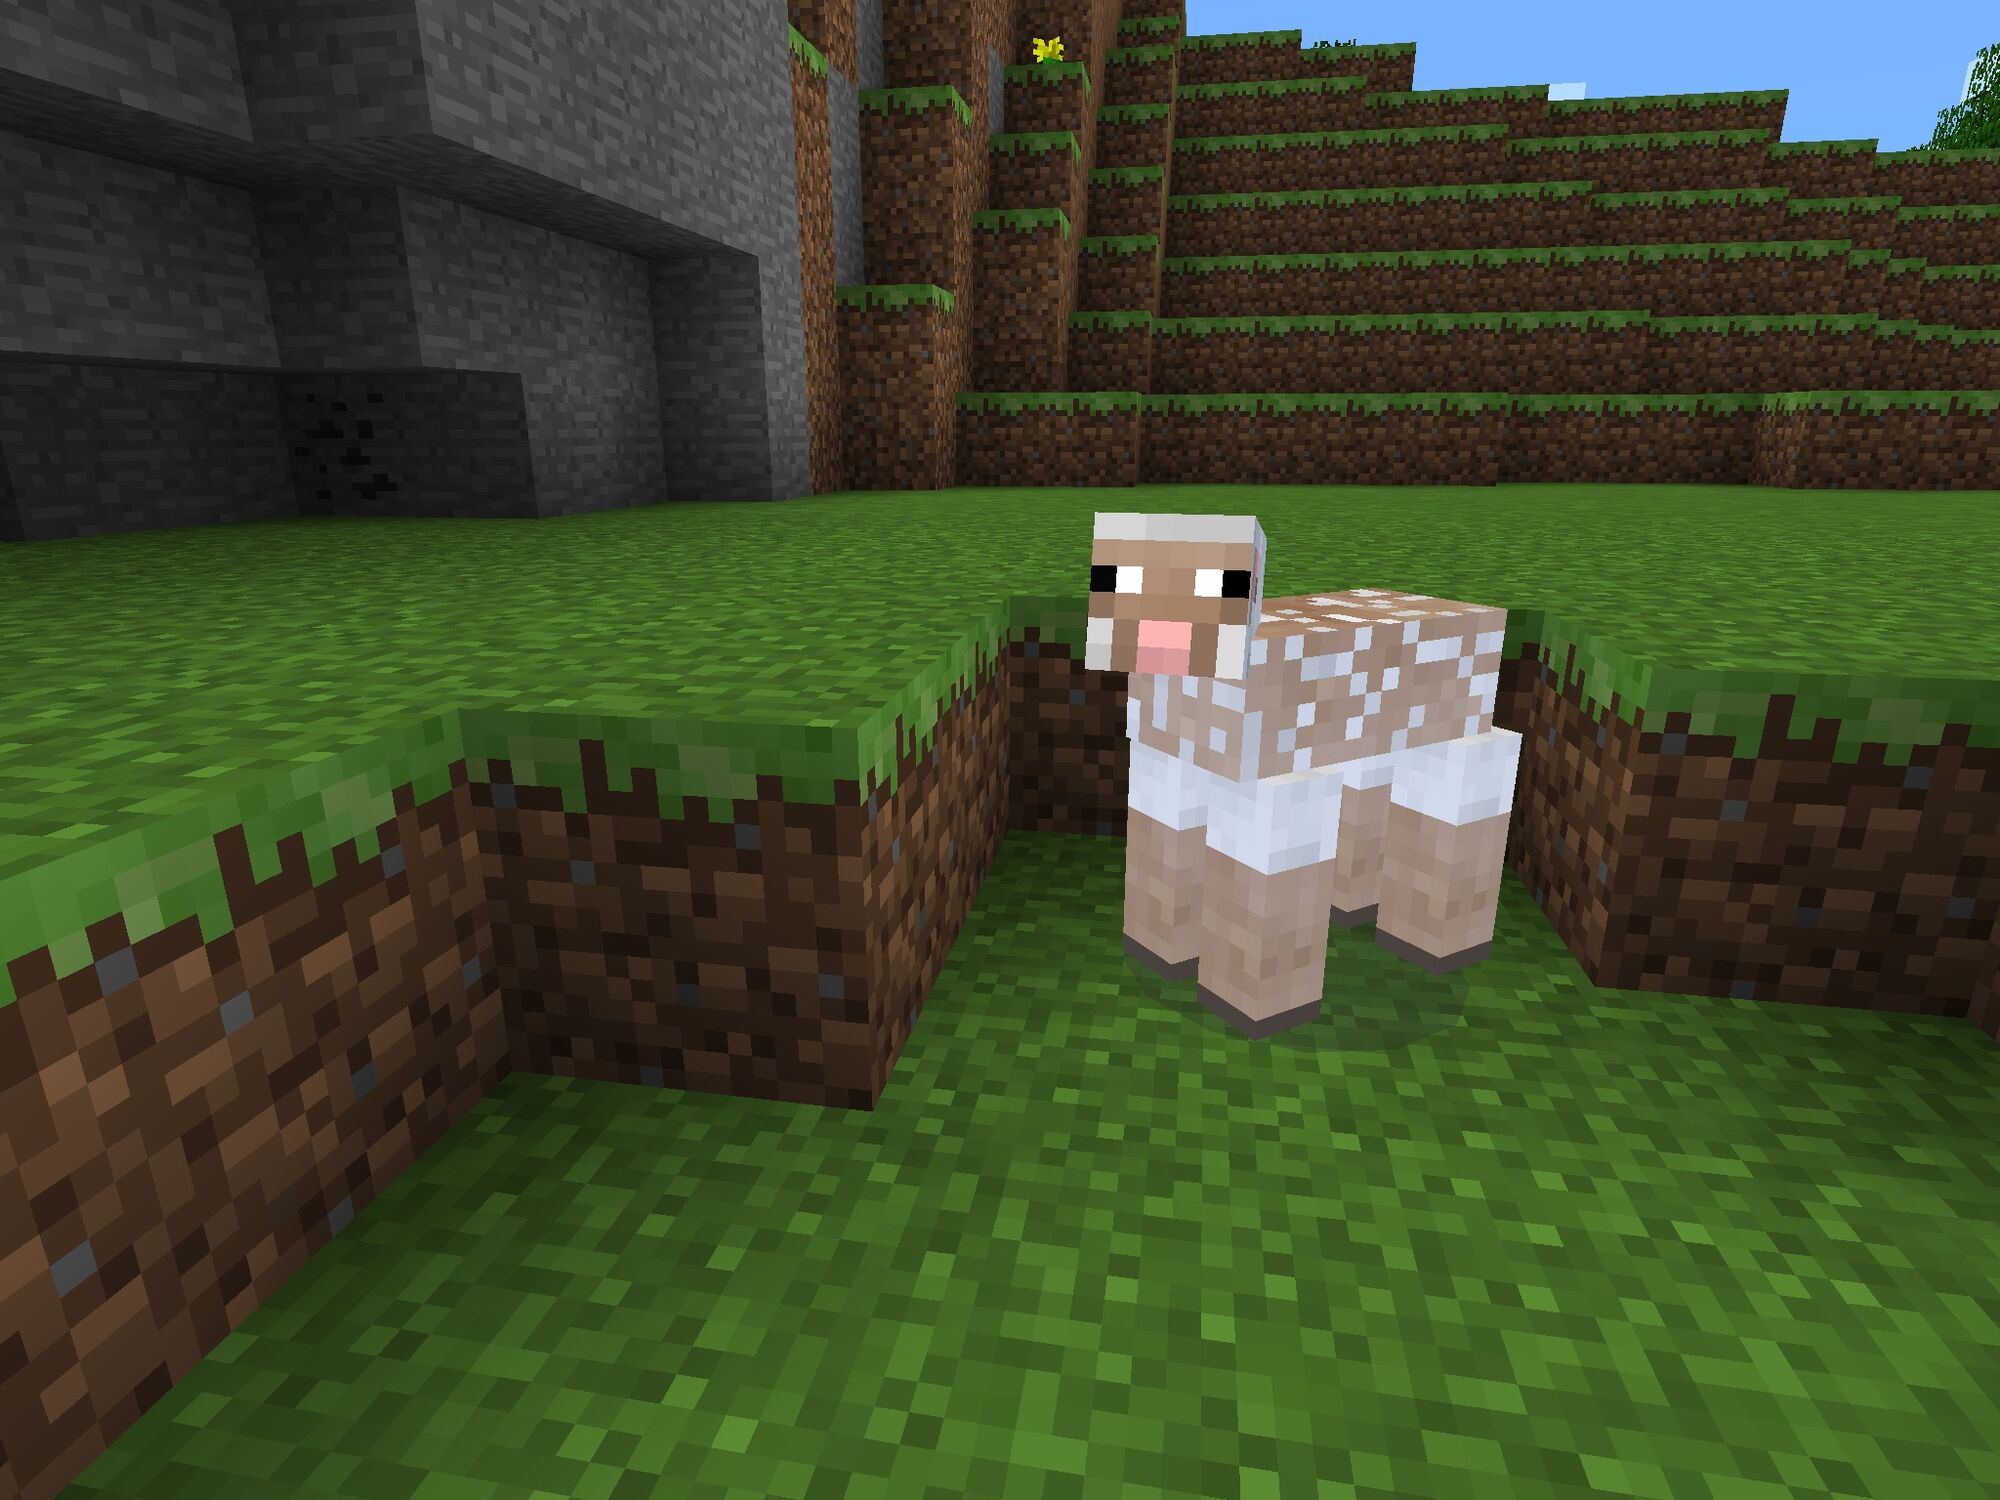 What is the title of this picture ? Image - Sheep Sheared.jpg | Minecraft Bedrock Wiki | FANDOM powered by